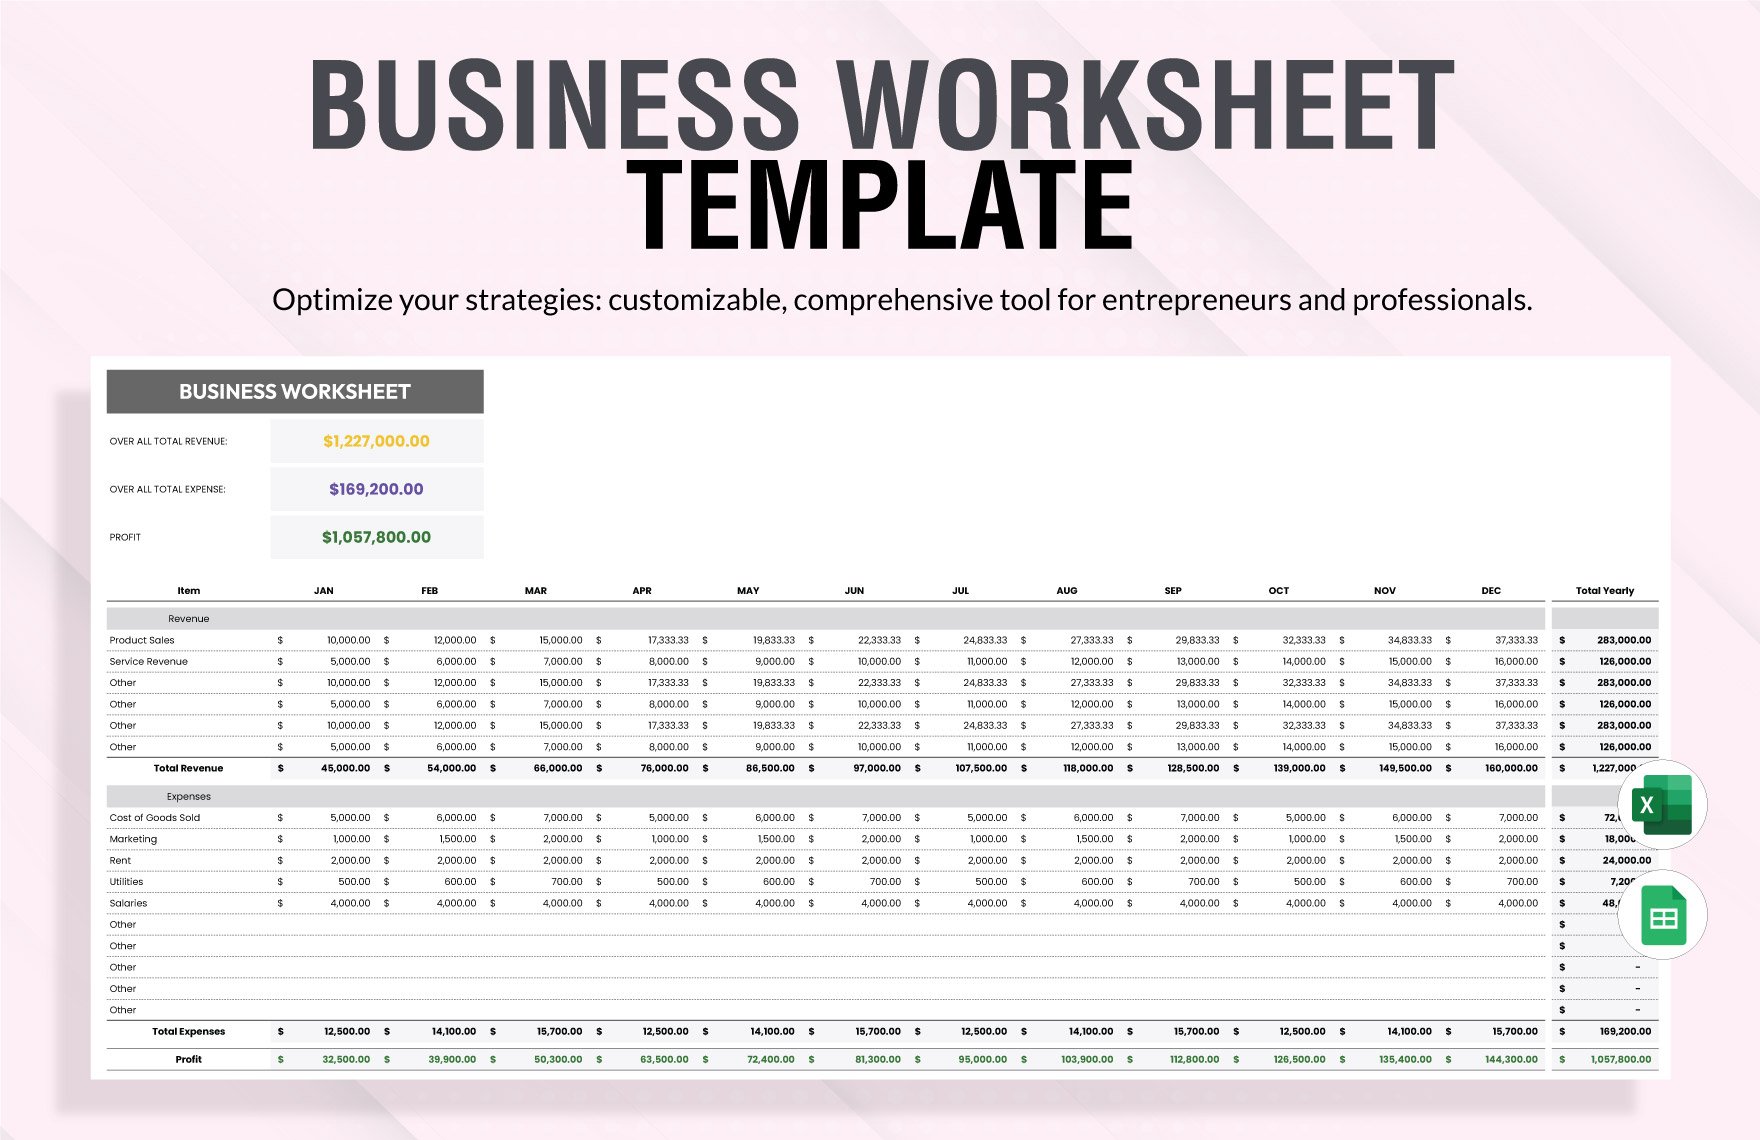 Business Worksheet Template in Excel, Google Sheets